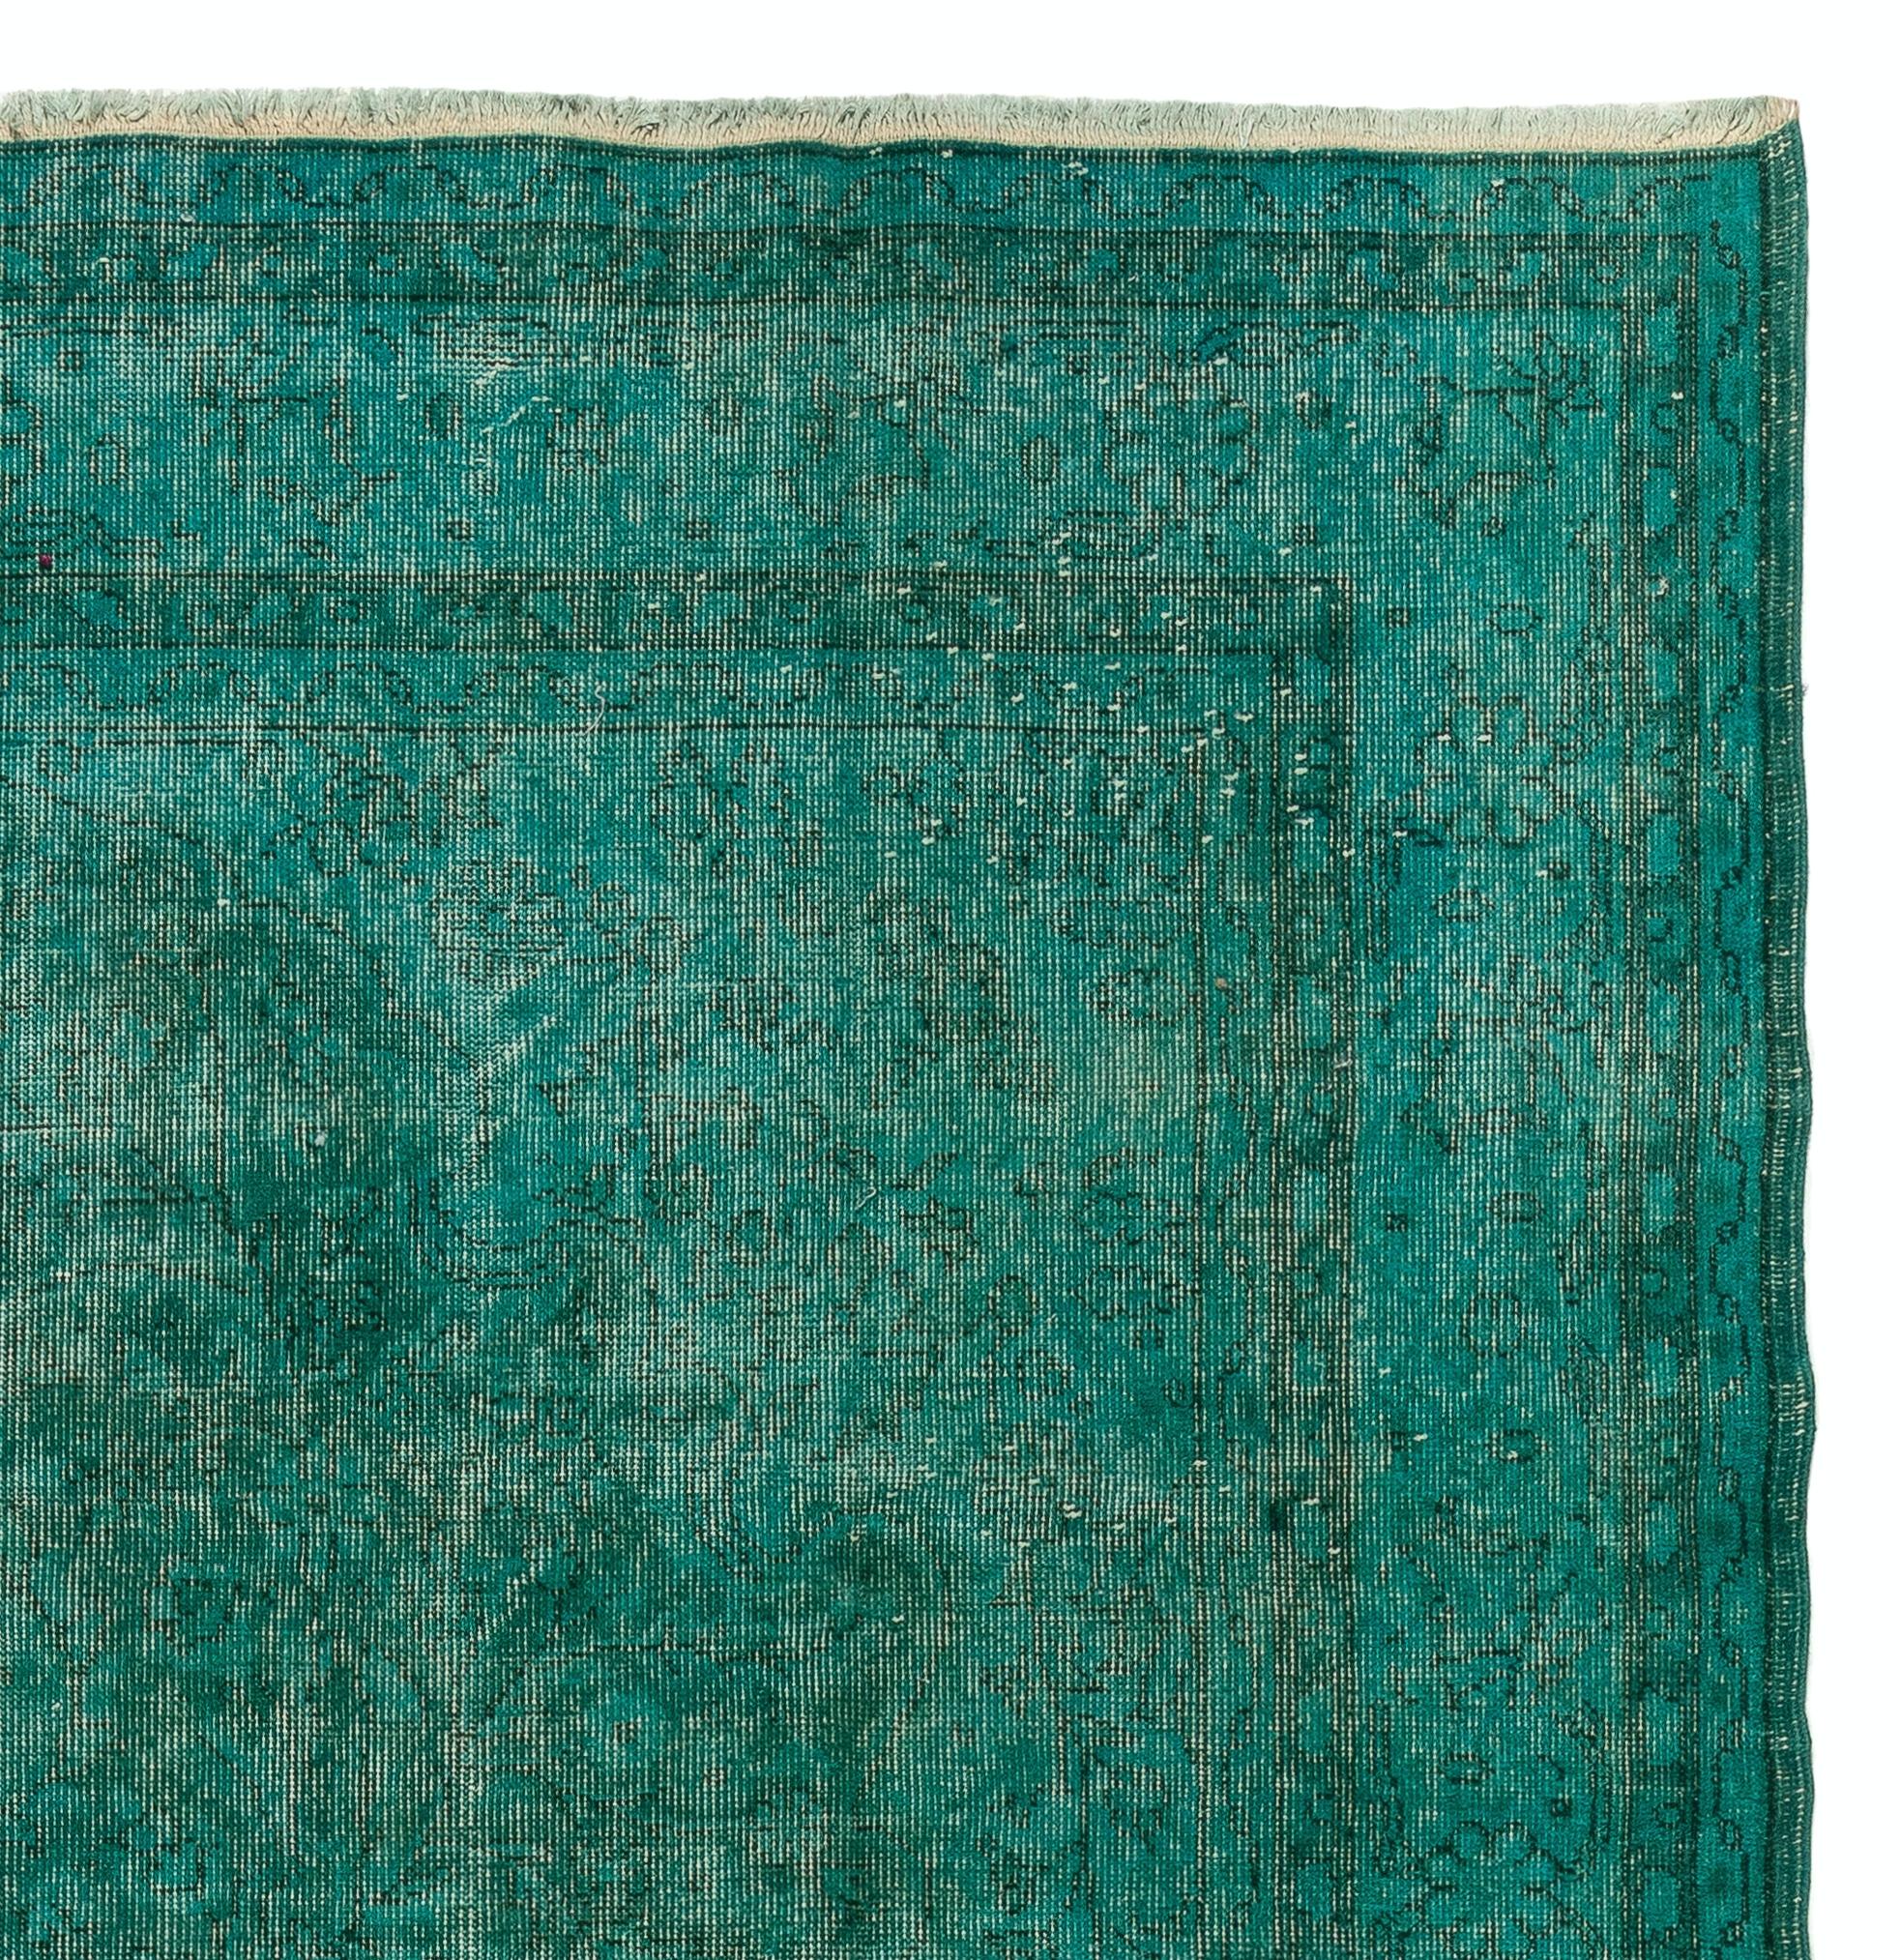 Hand-Woven 6.6x10.6 Ft Turquoise Blue Color ReDyed Vintage Turkish Rug for Modern Interiors